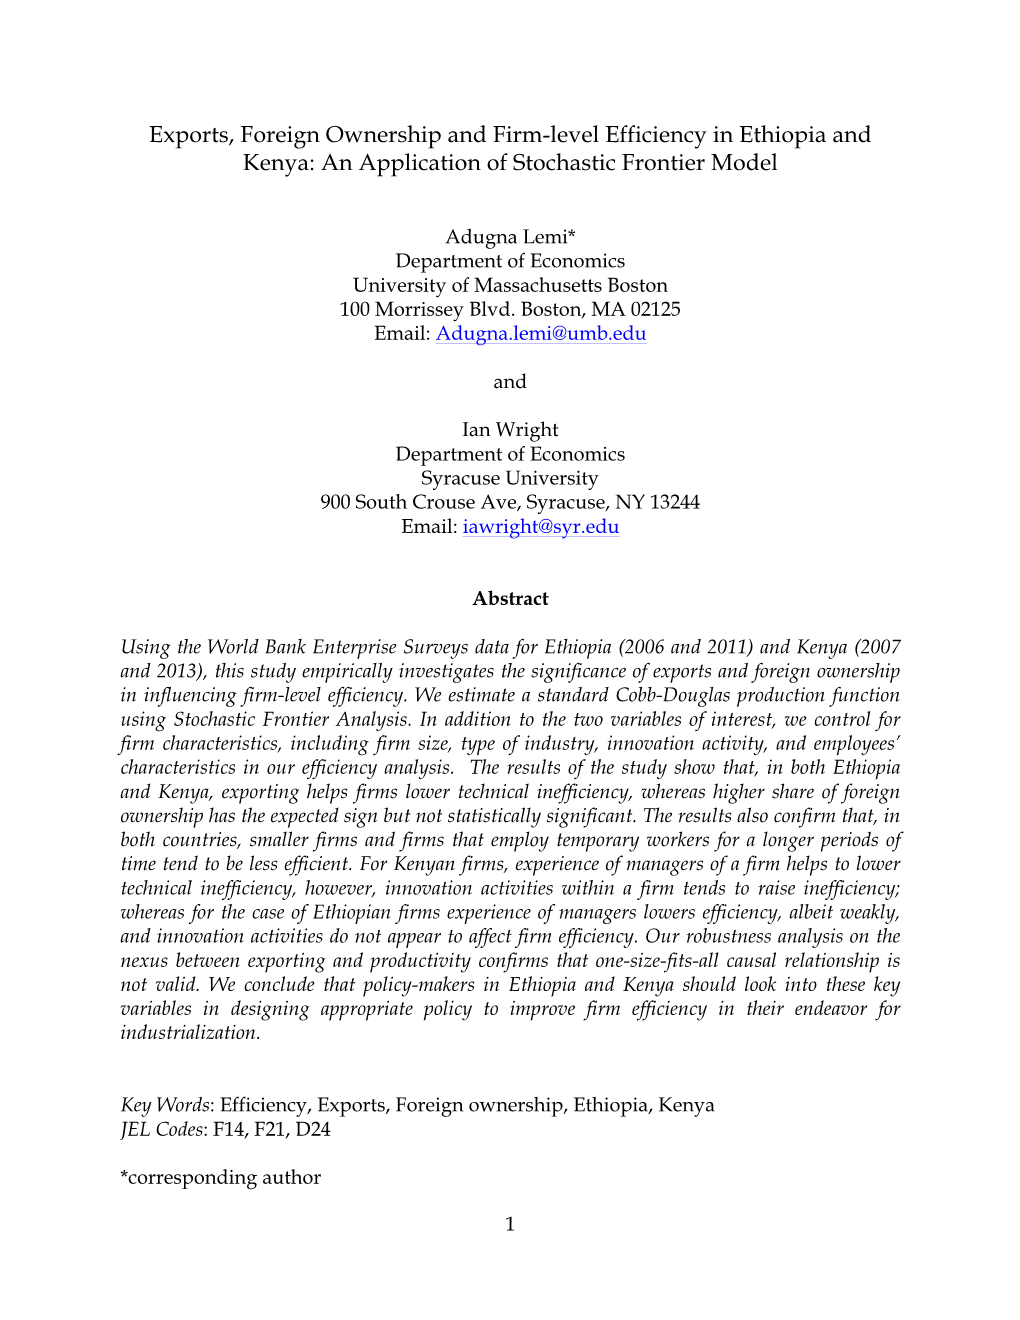 Exports, Foreign Ownership and Firm-Level Efficiency in Ethiopia and Kenya: an Application of Stochastic Frontier Model